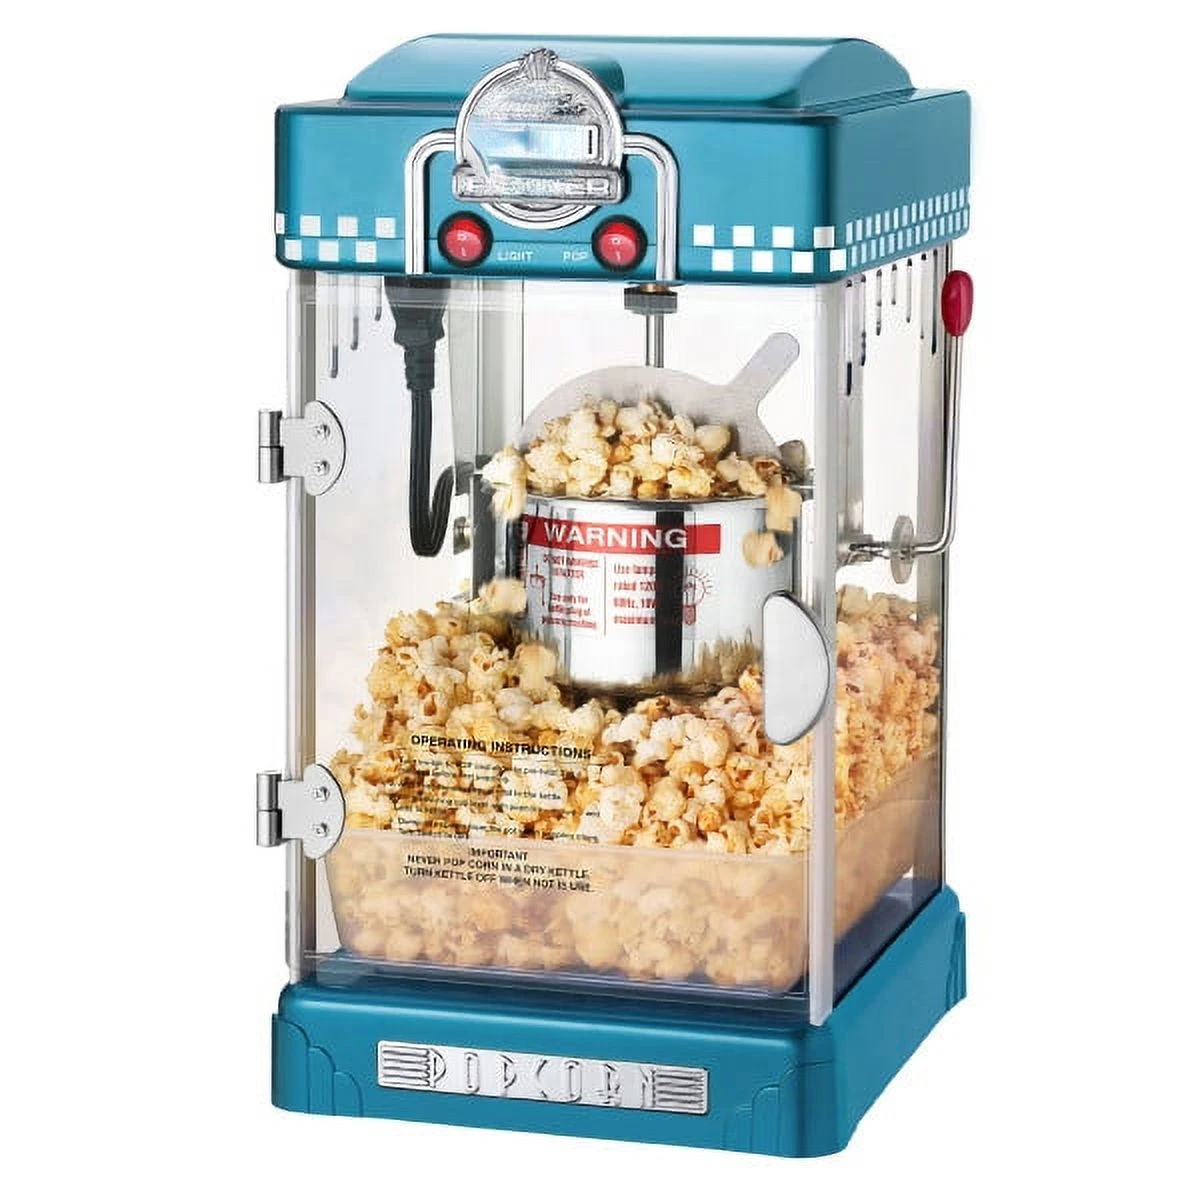 

Bambino Countertop Popcorn Machine – 2.5oz Kettle with Measuring Spoon, , and 25 Serving Bags by (Blue)